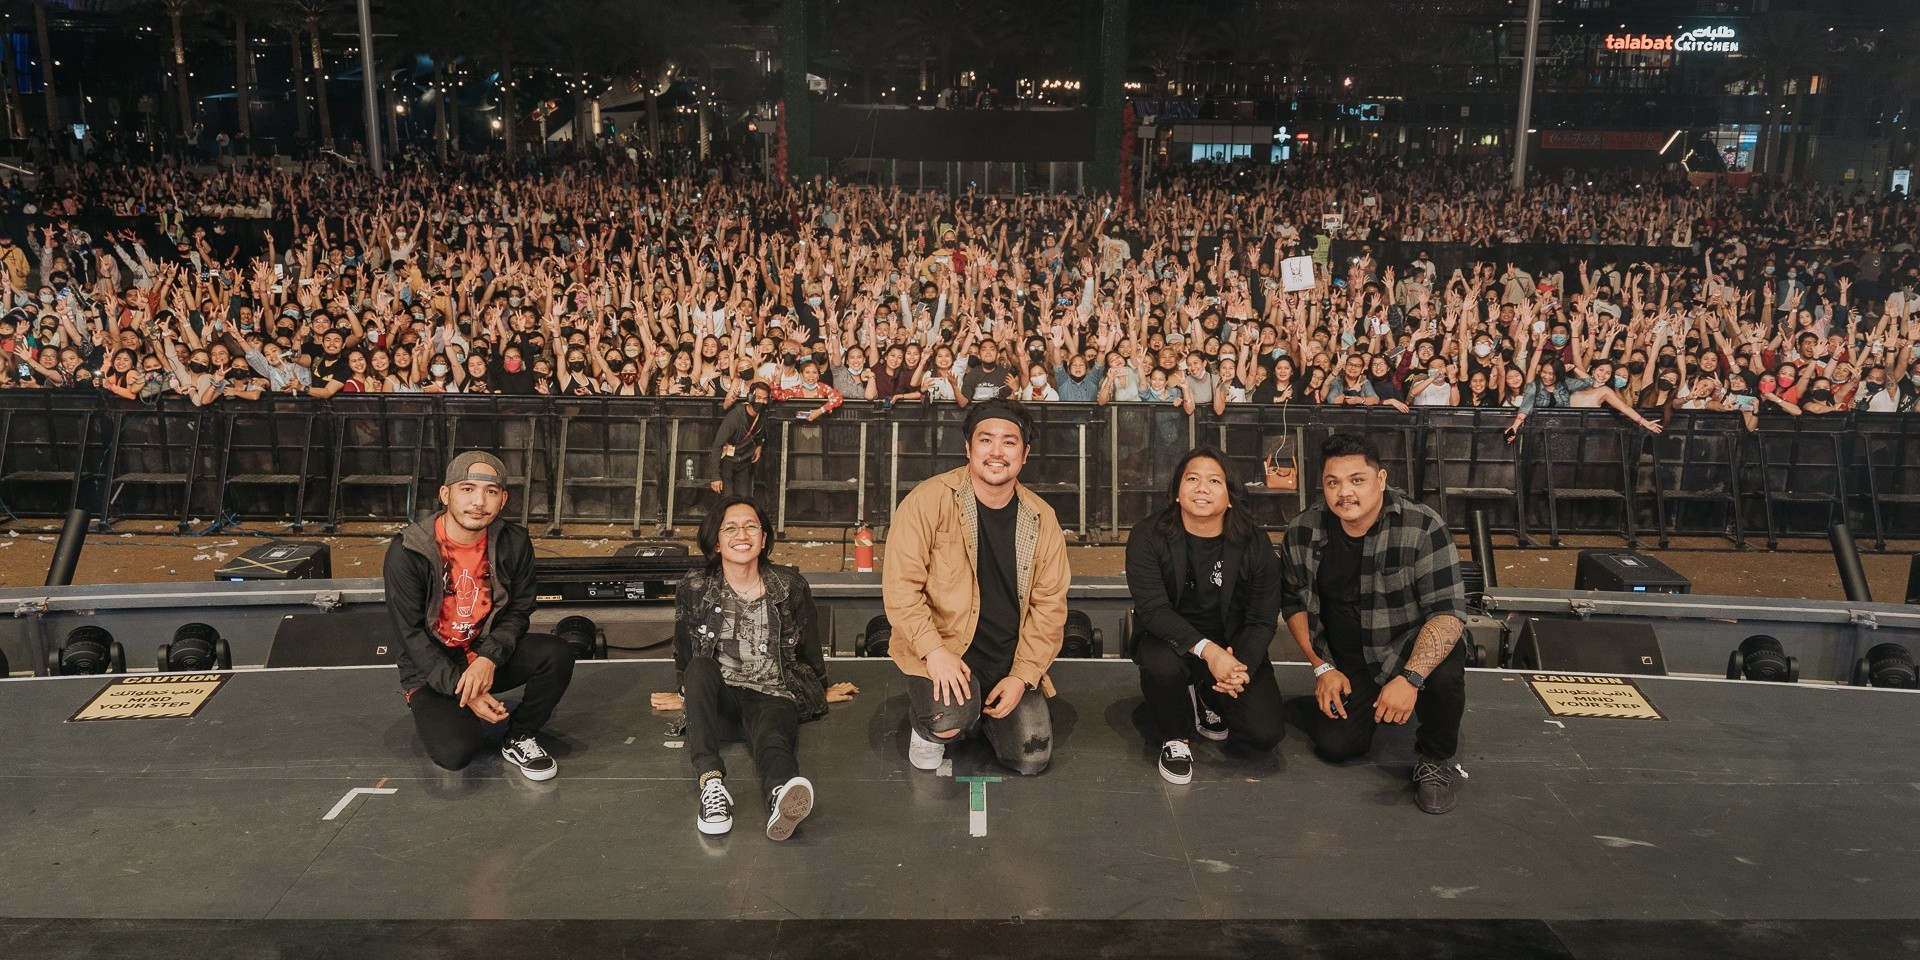 December Avenue on their return to the live stage in Dubai, plans for 2022: "Definitely surreal and nerve-wracking"